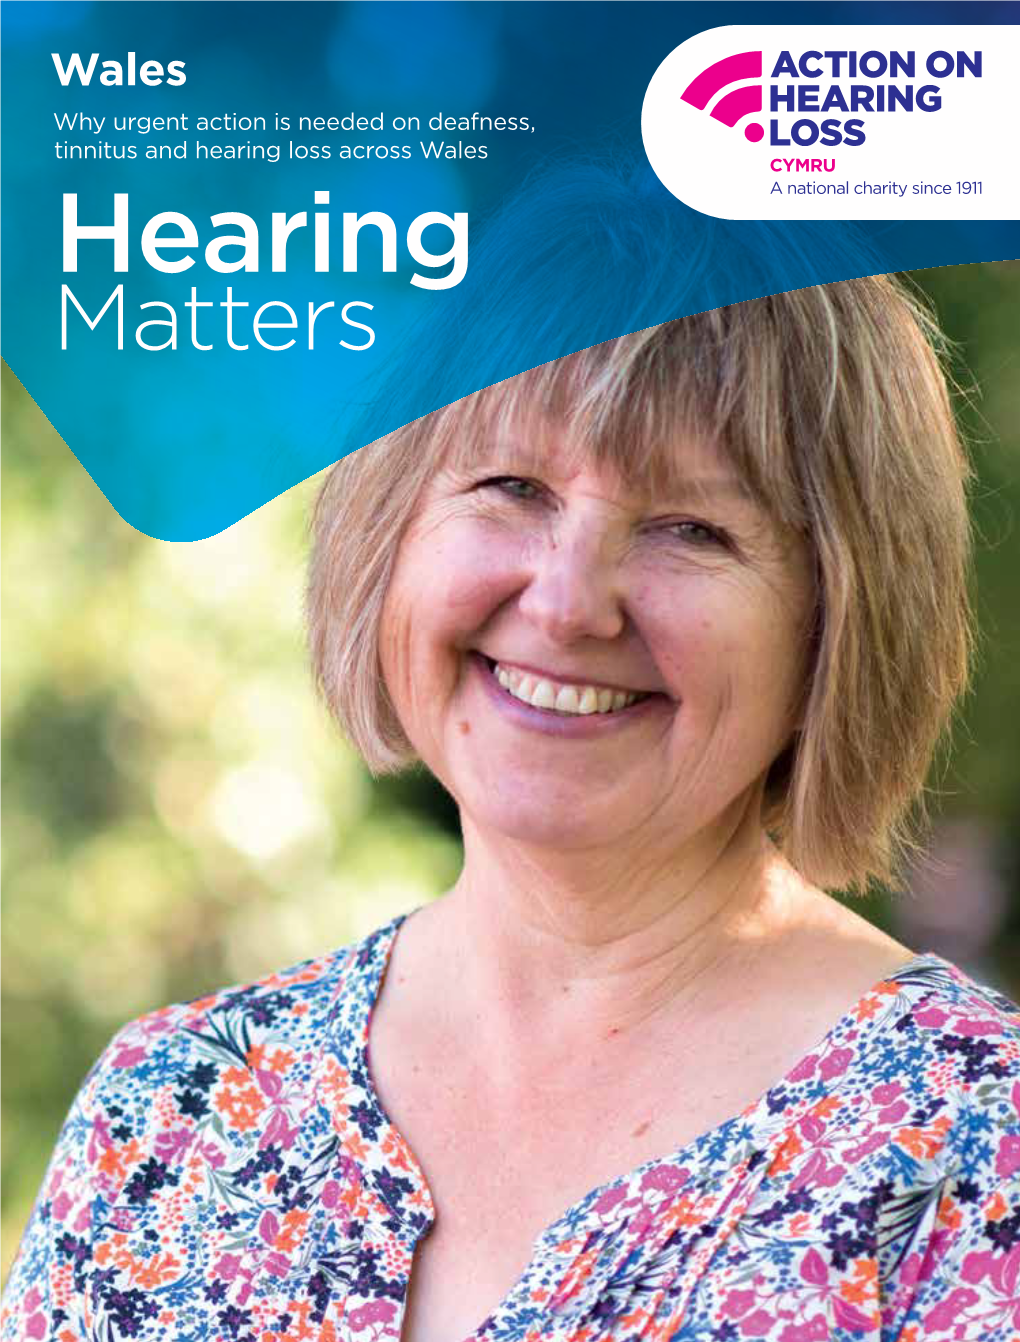 Wales Why Urgent Action Is Needed on Deafness, Tinnitus and Hearing Loss Across Wales Hearing Matters 2